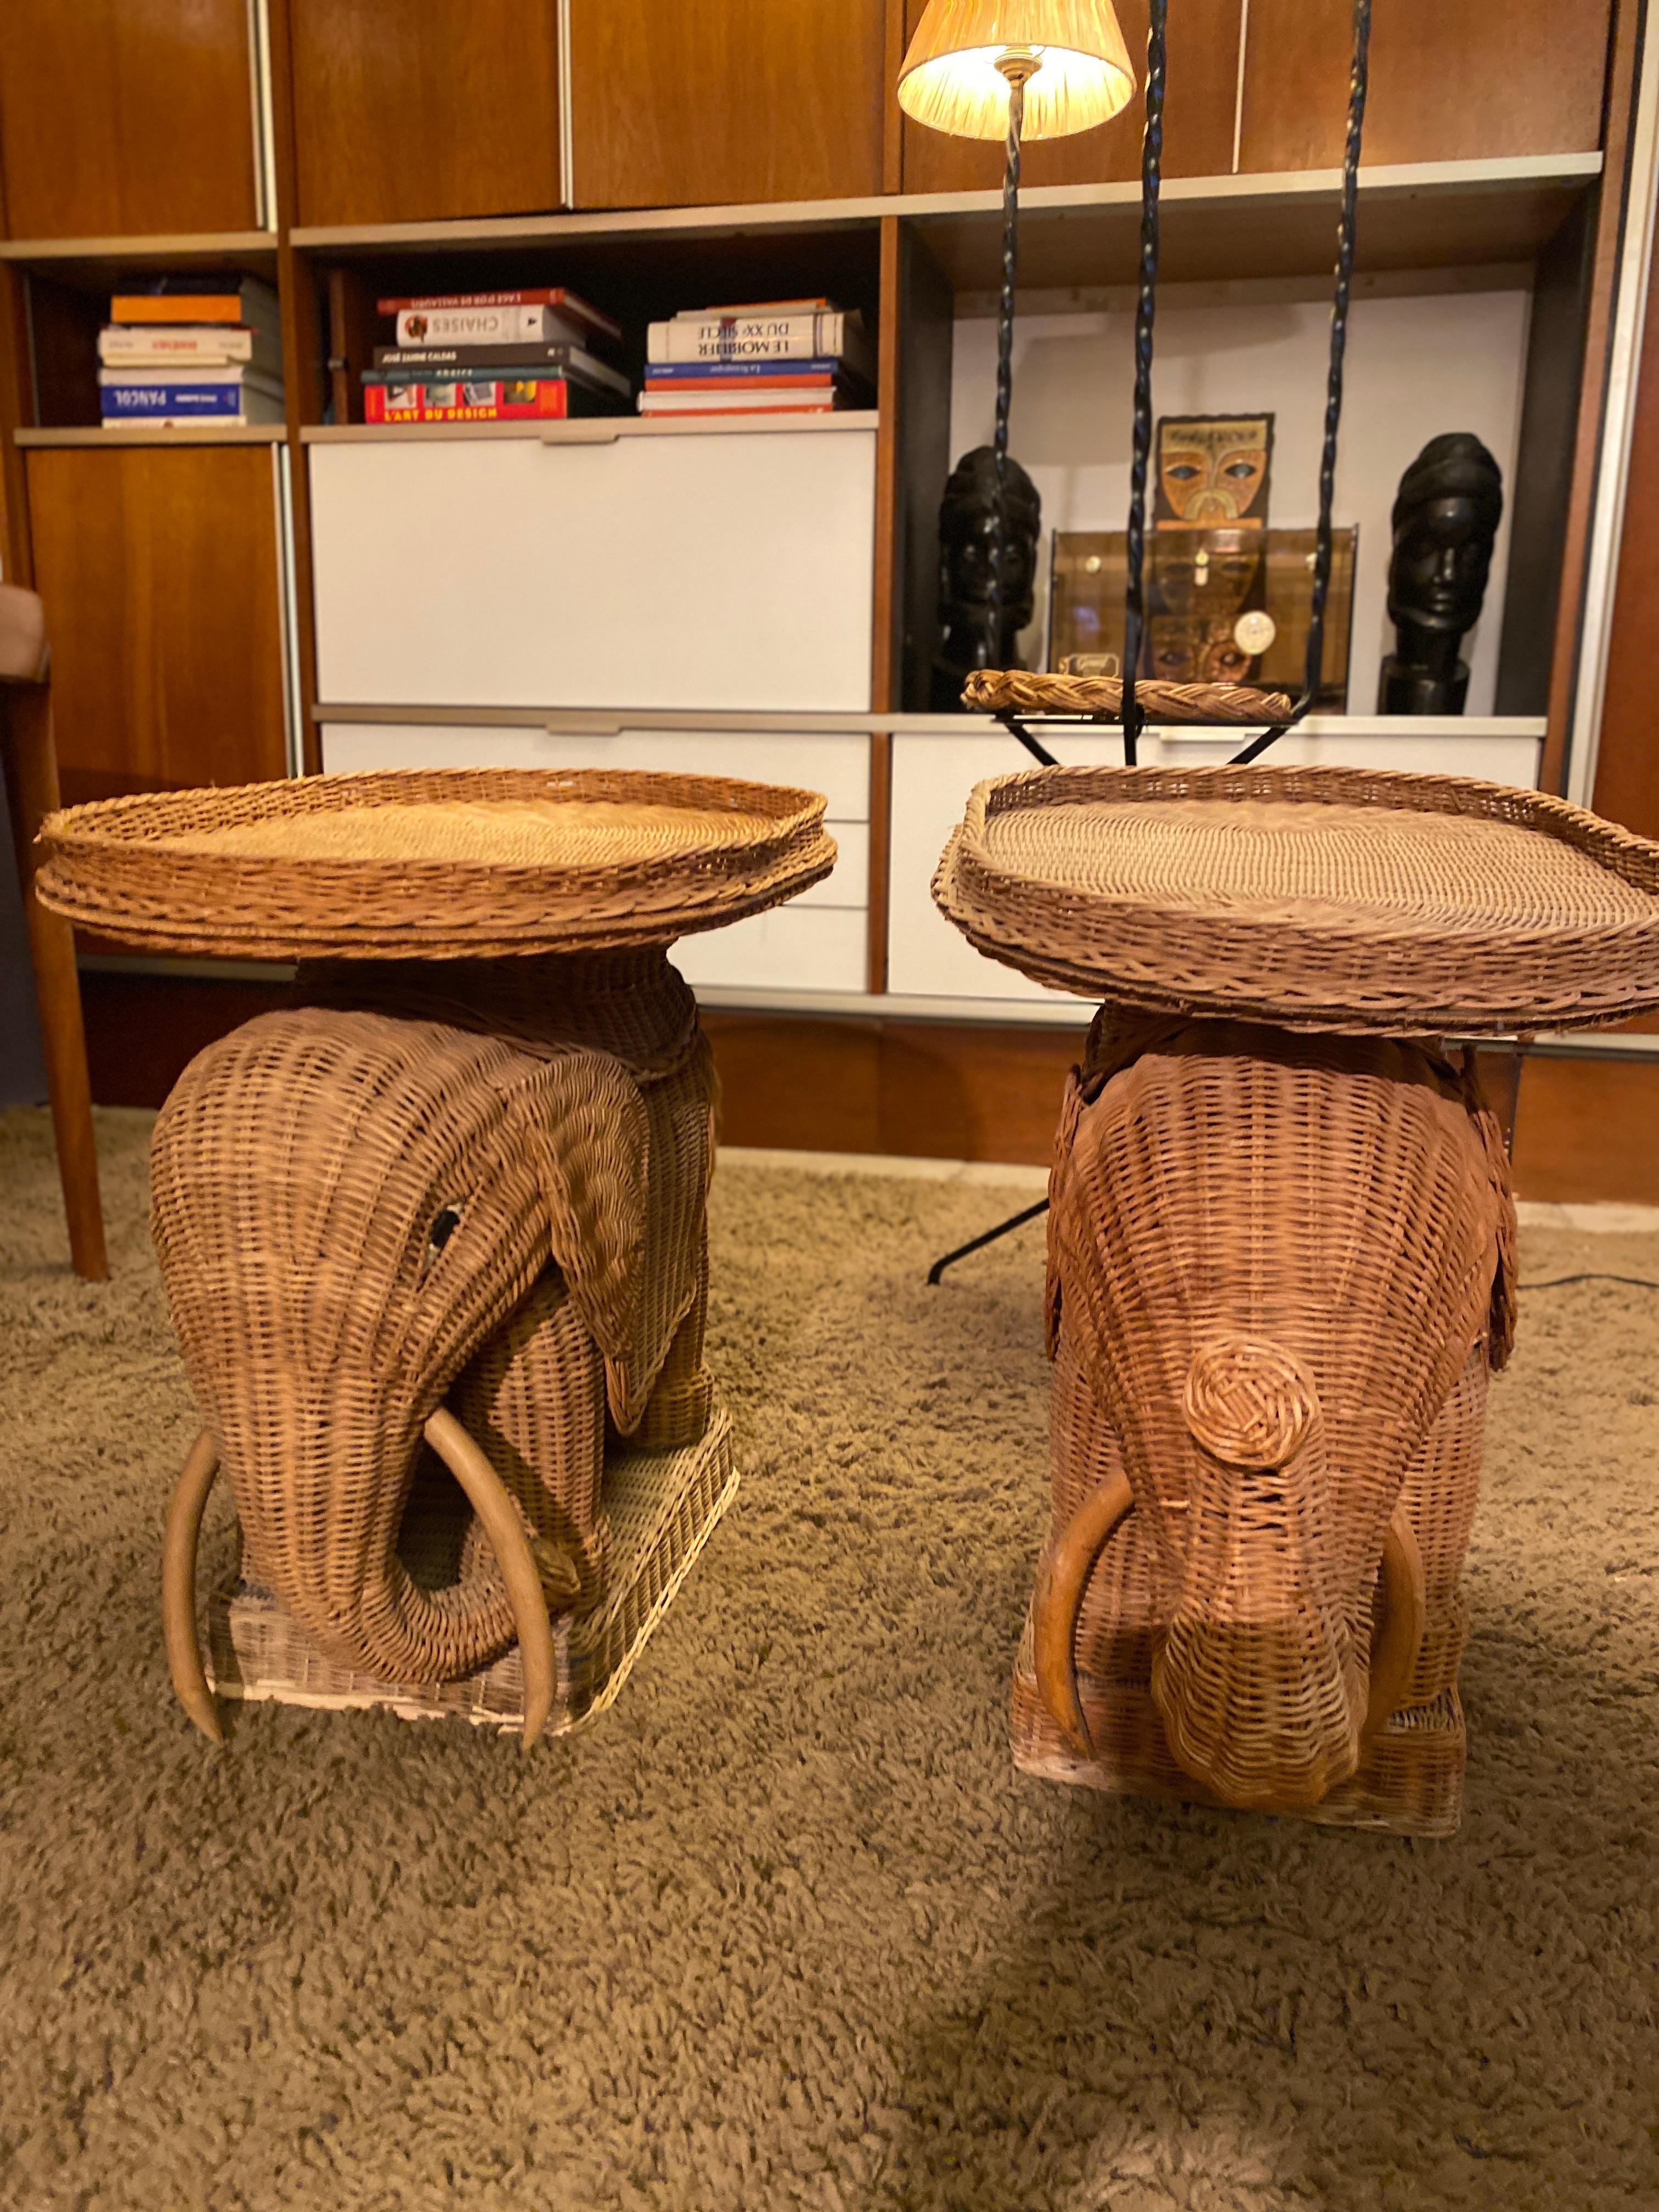 Pair of elephant-shaped sofa in woven wicker 1970, removable tray and wooden defense.
Vivaï del Sud style 